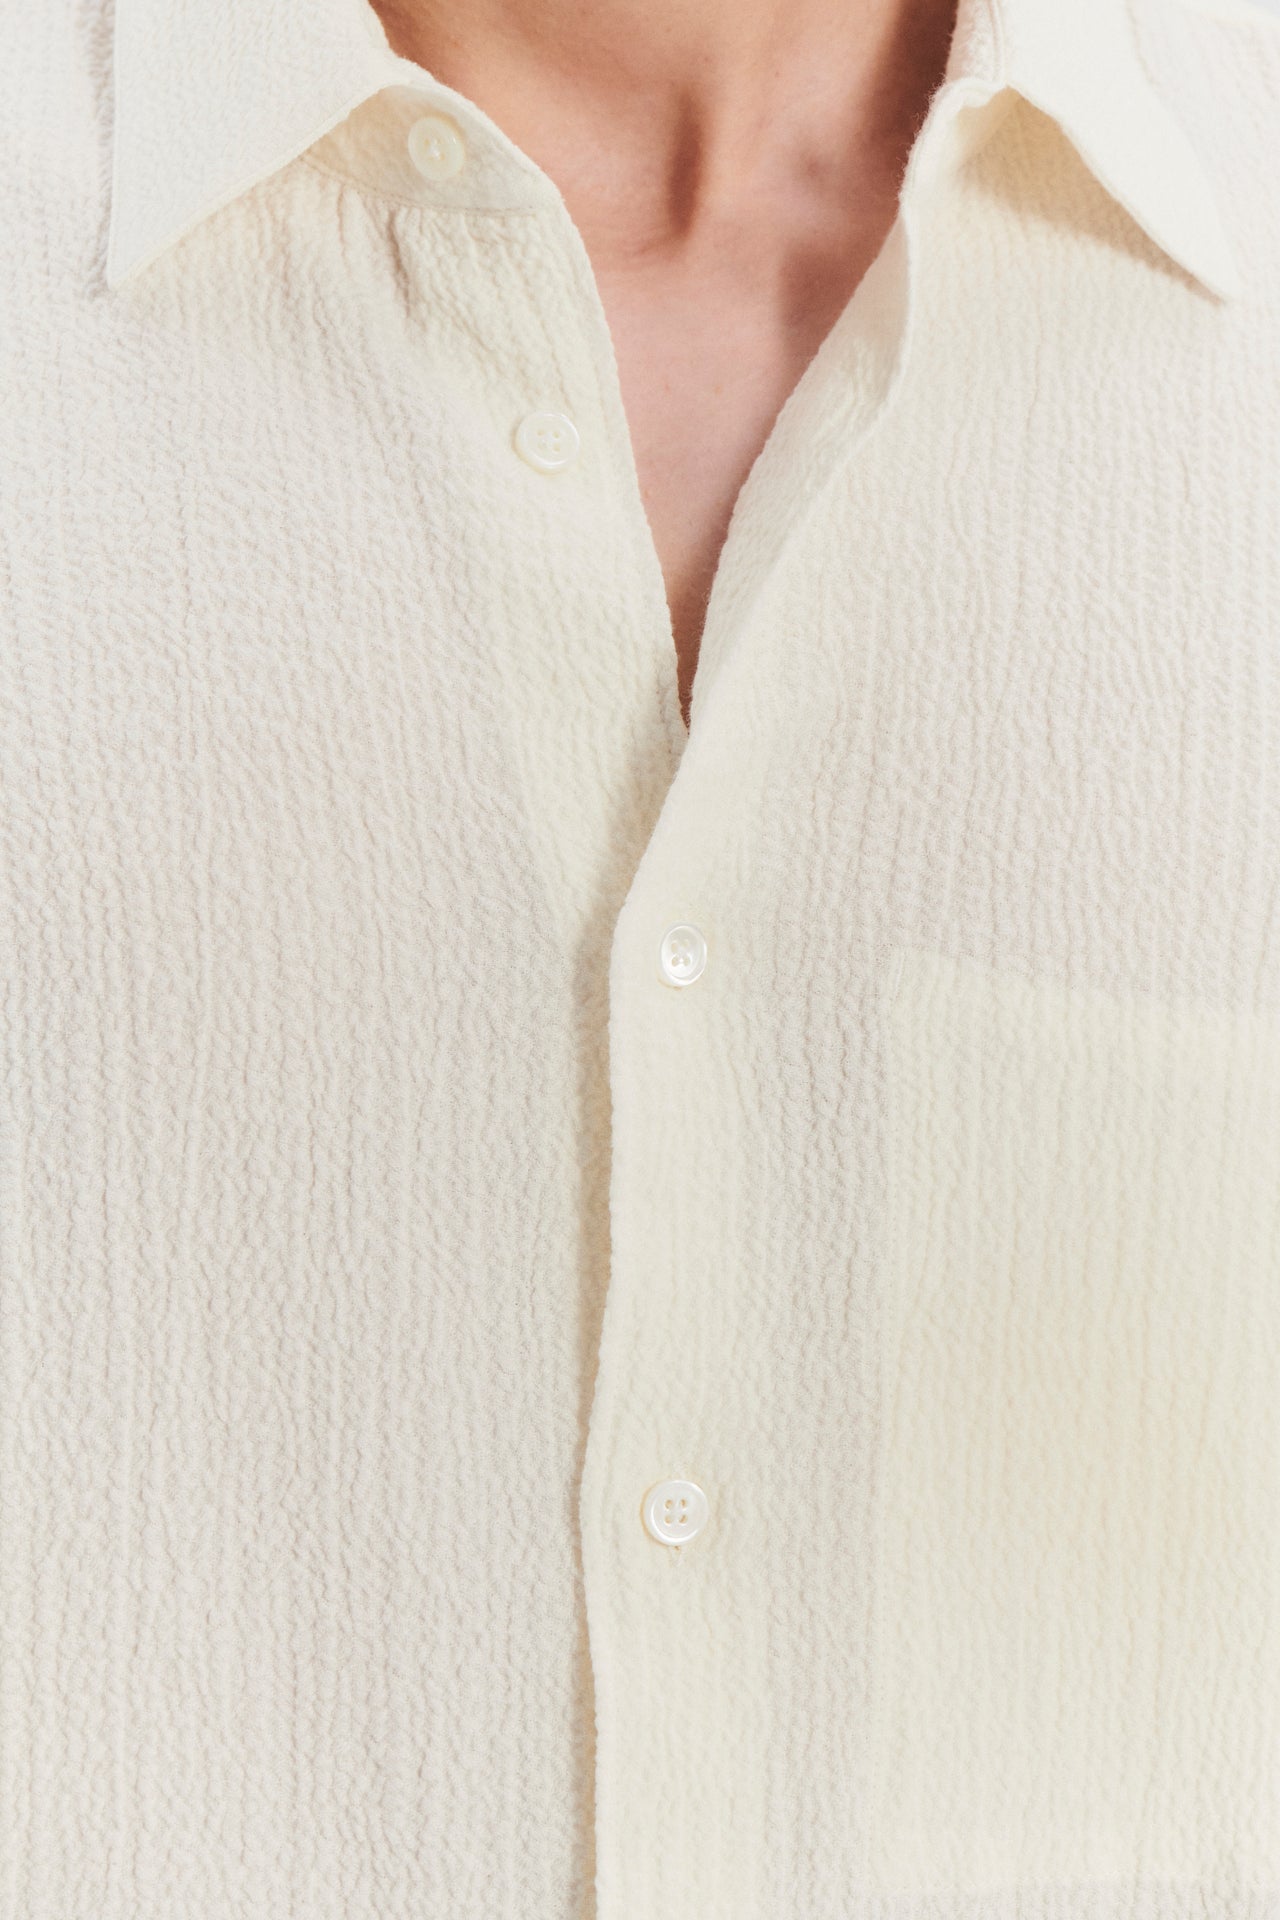 Feel Good Shirt in the Finest Creamy White Portuguese Cashmere and Cotton Seersucker